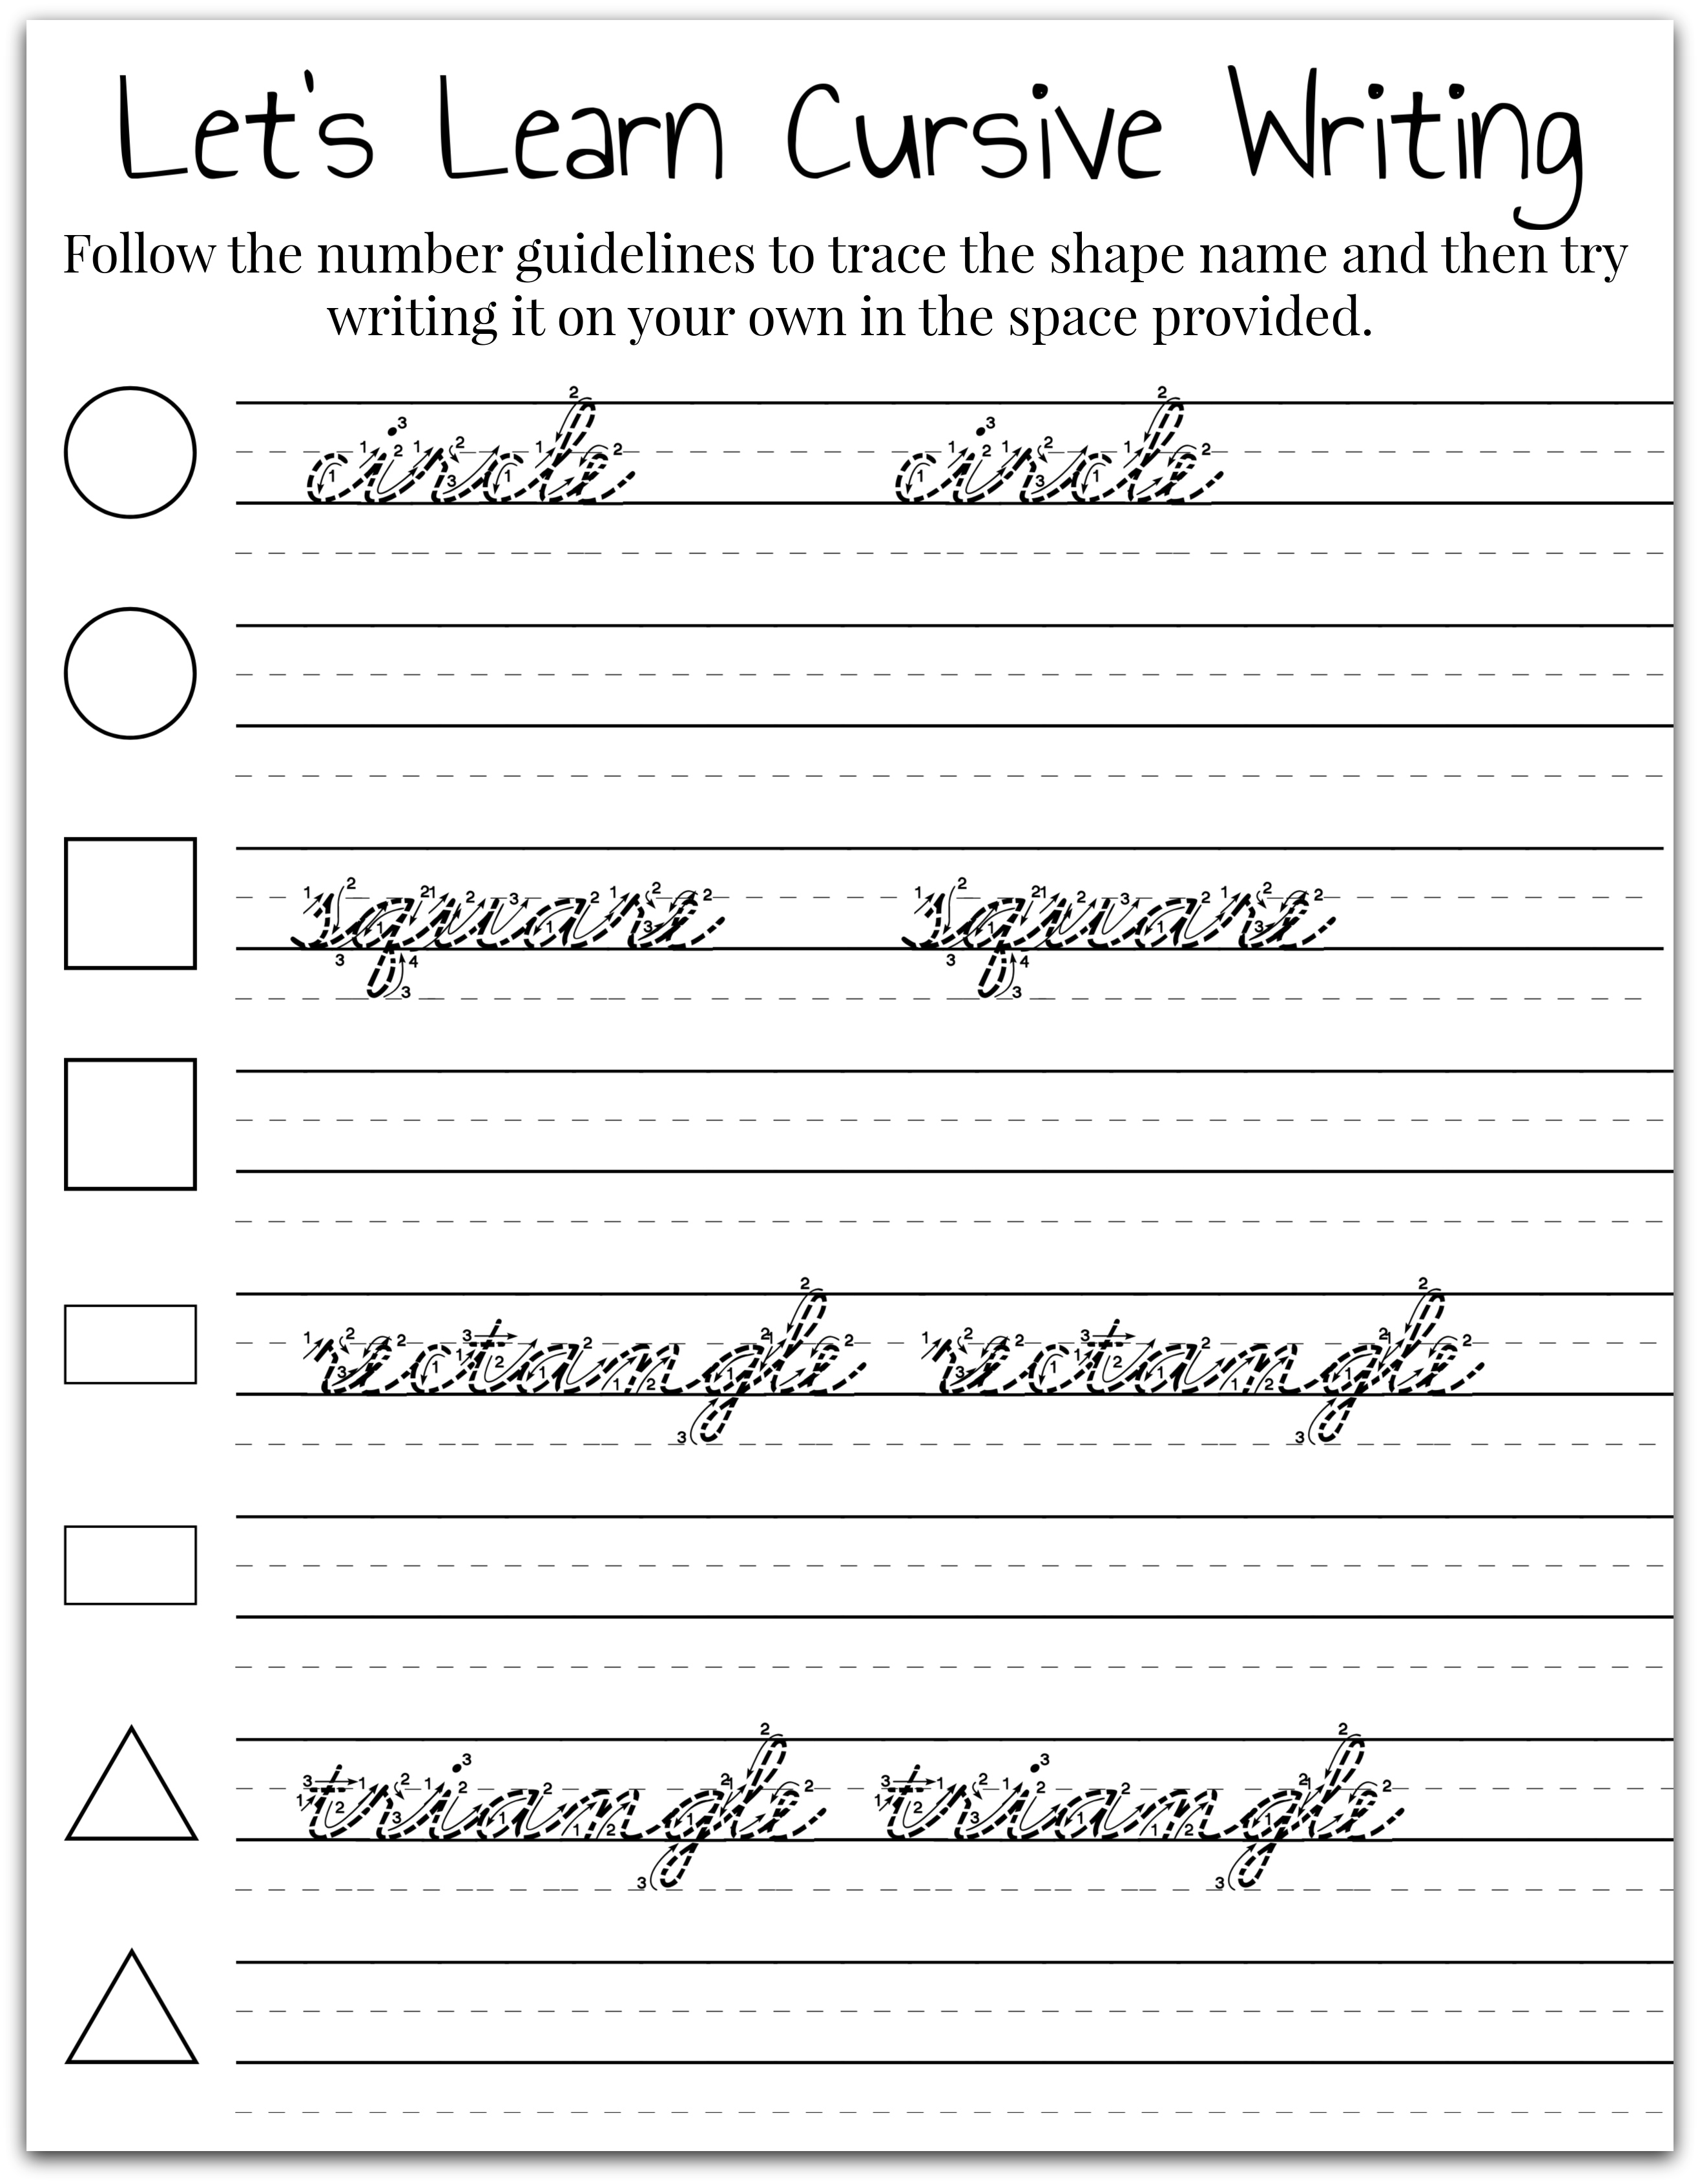 Learning Cursive Writing For Kids - Extreme Couponing Mom